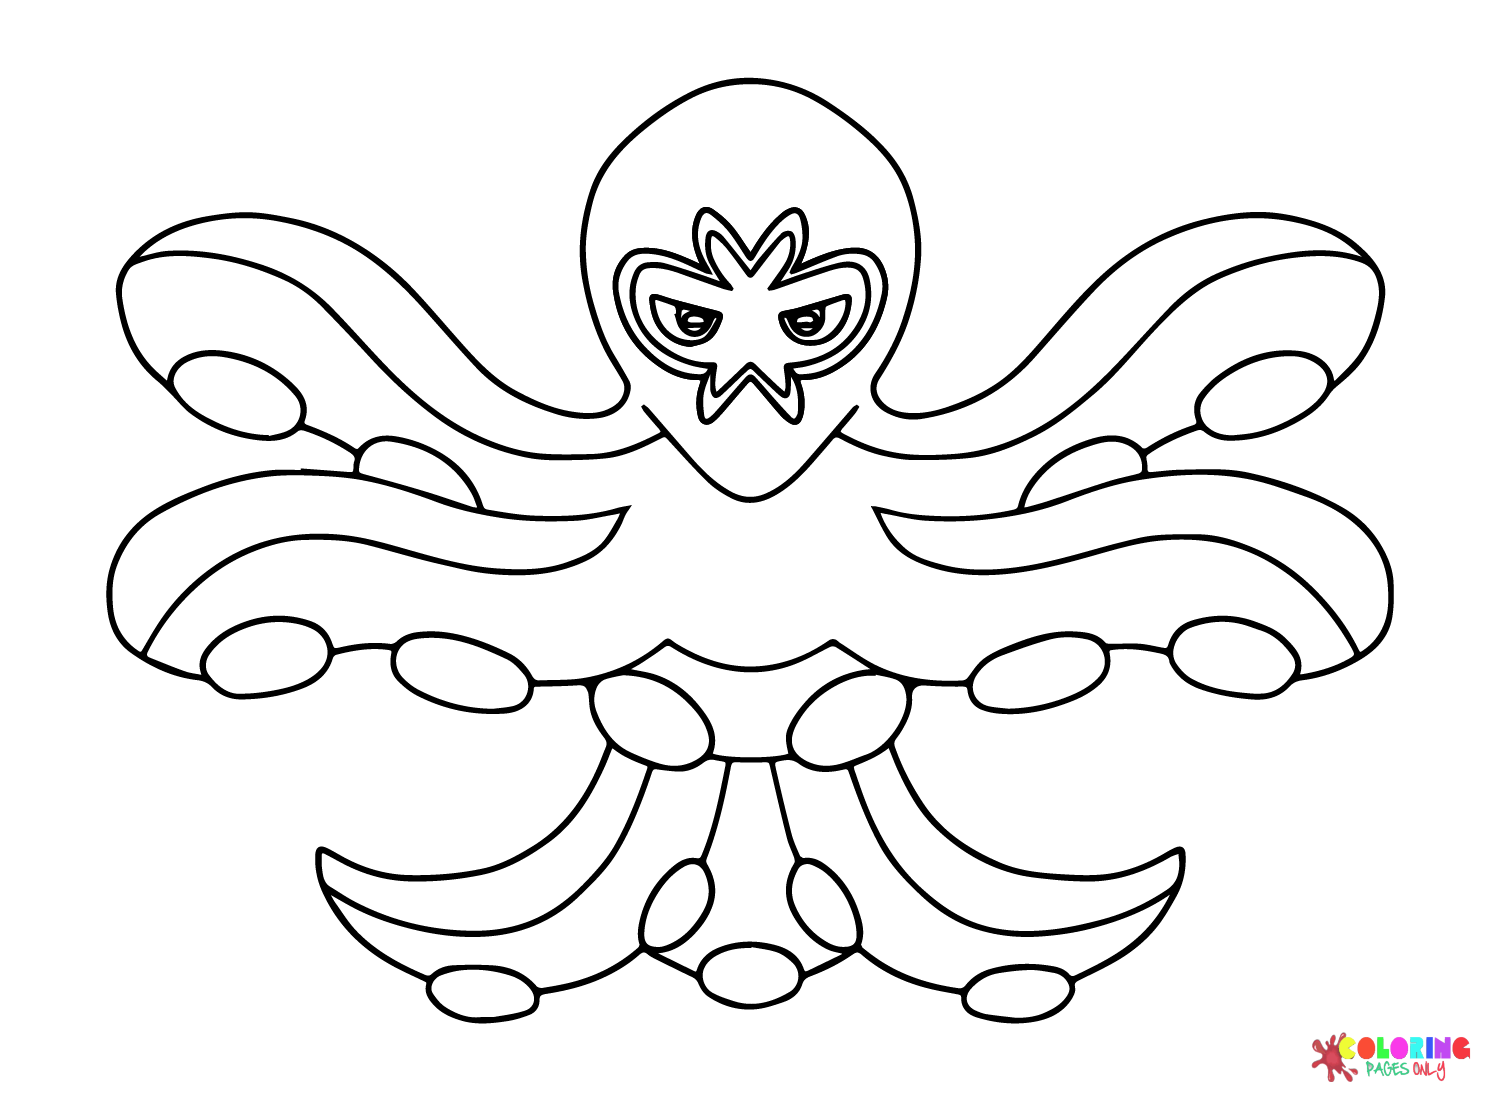 The Grapploct Coloring Page